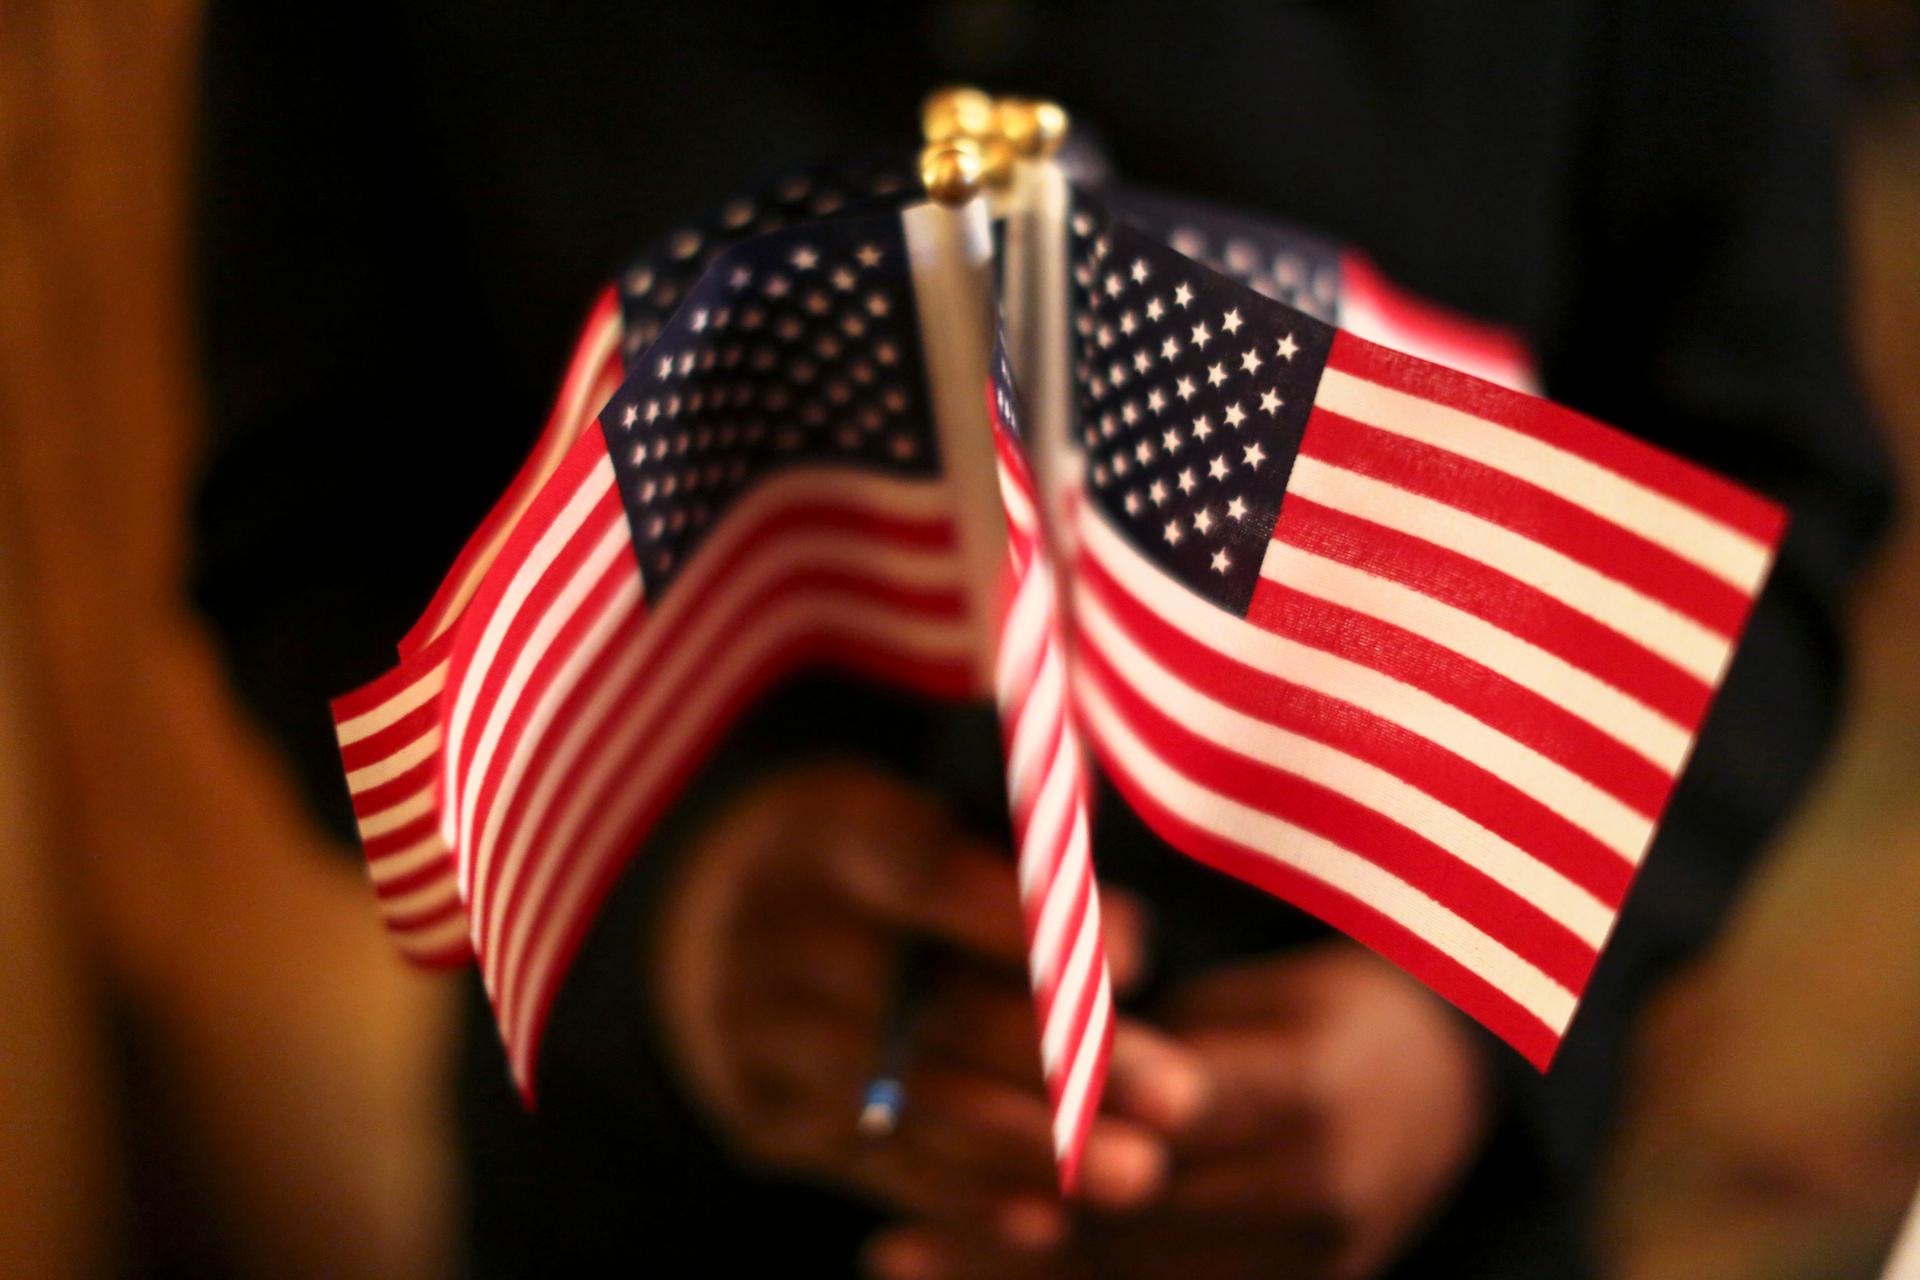 A woman holds a cluster of US flags during a US Citizenship and Immigration Services naturalization ceremony in Oakland, California, on Aug. 13, 2013.